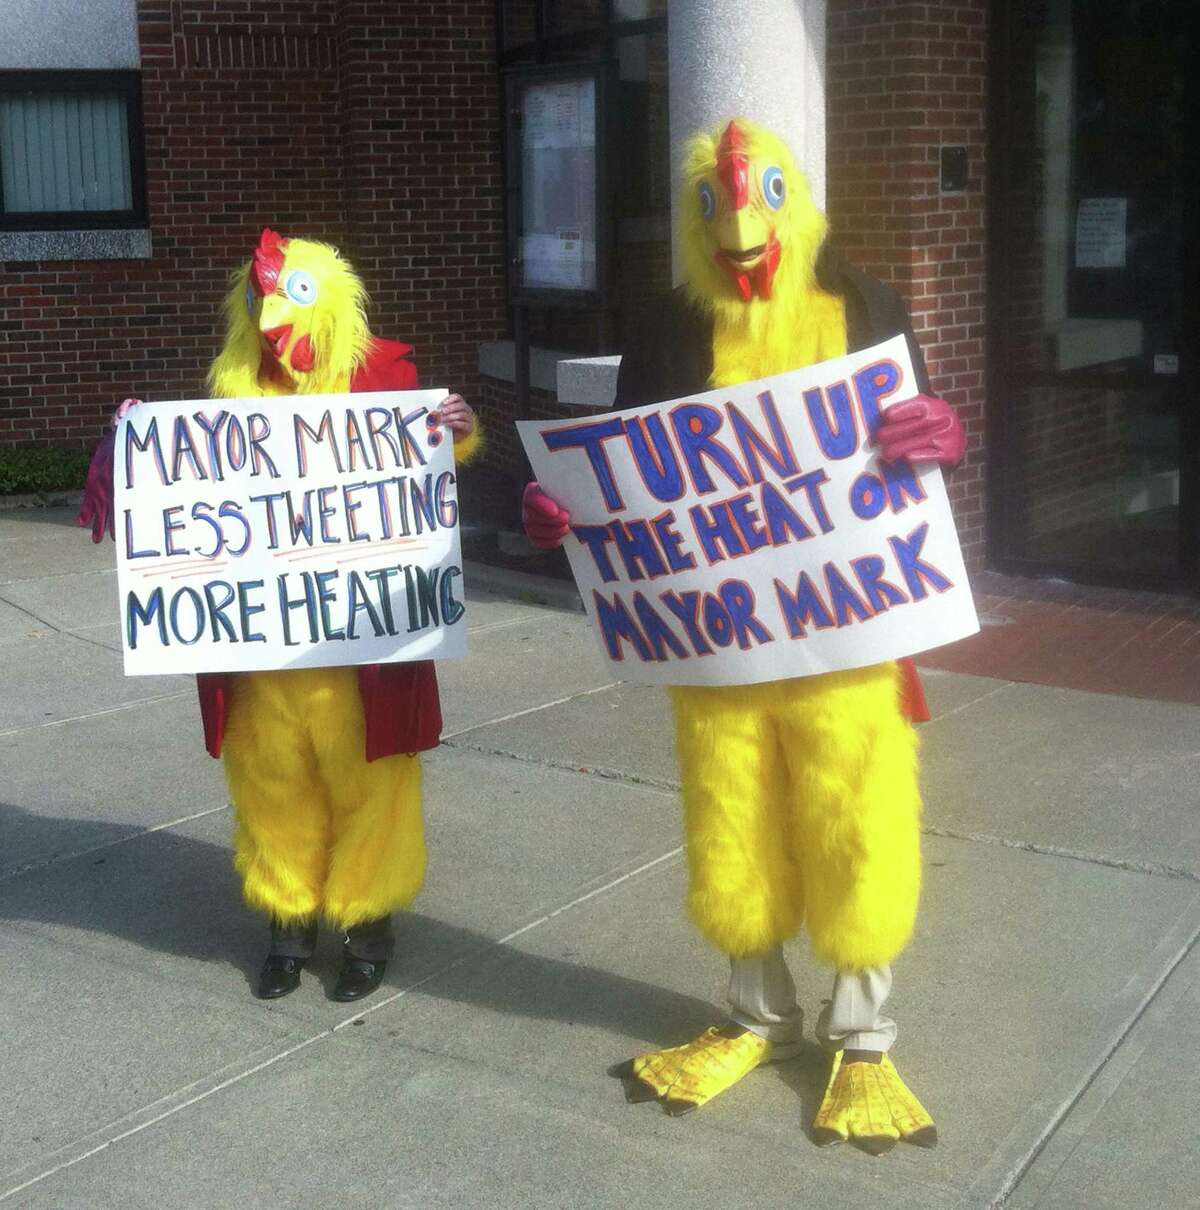 Two people dressed up as chickens were sent to City Hall by state Democrats Tuesday to poke fun at a Twitter exchange between Mayor Mark Boughton and a high school student who had complained about a lack of heat at the school.